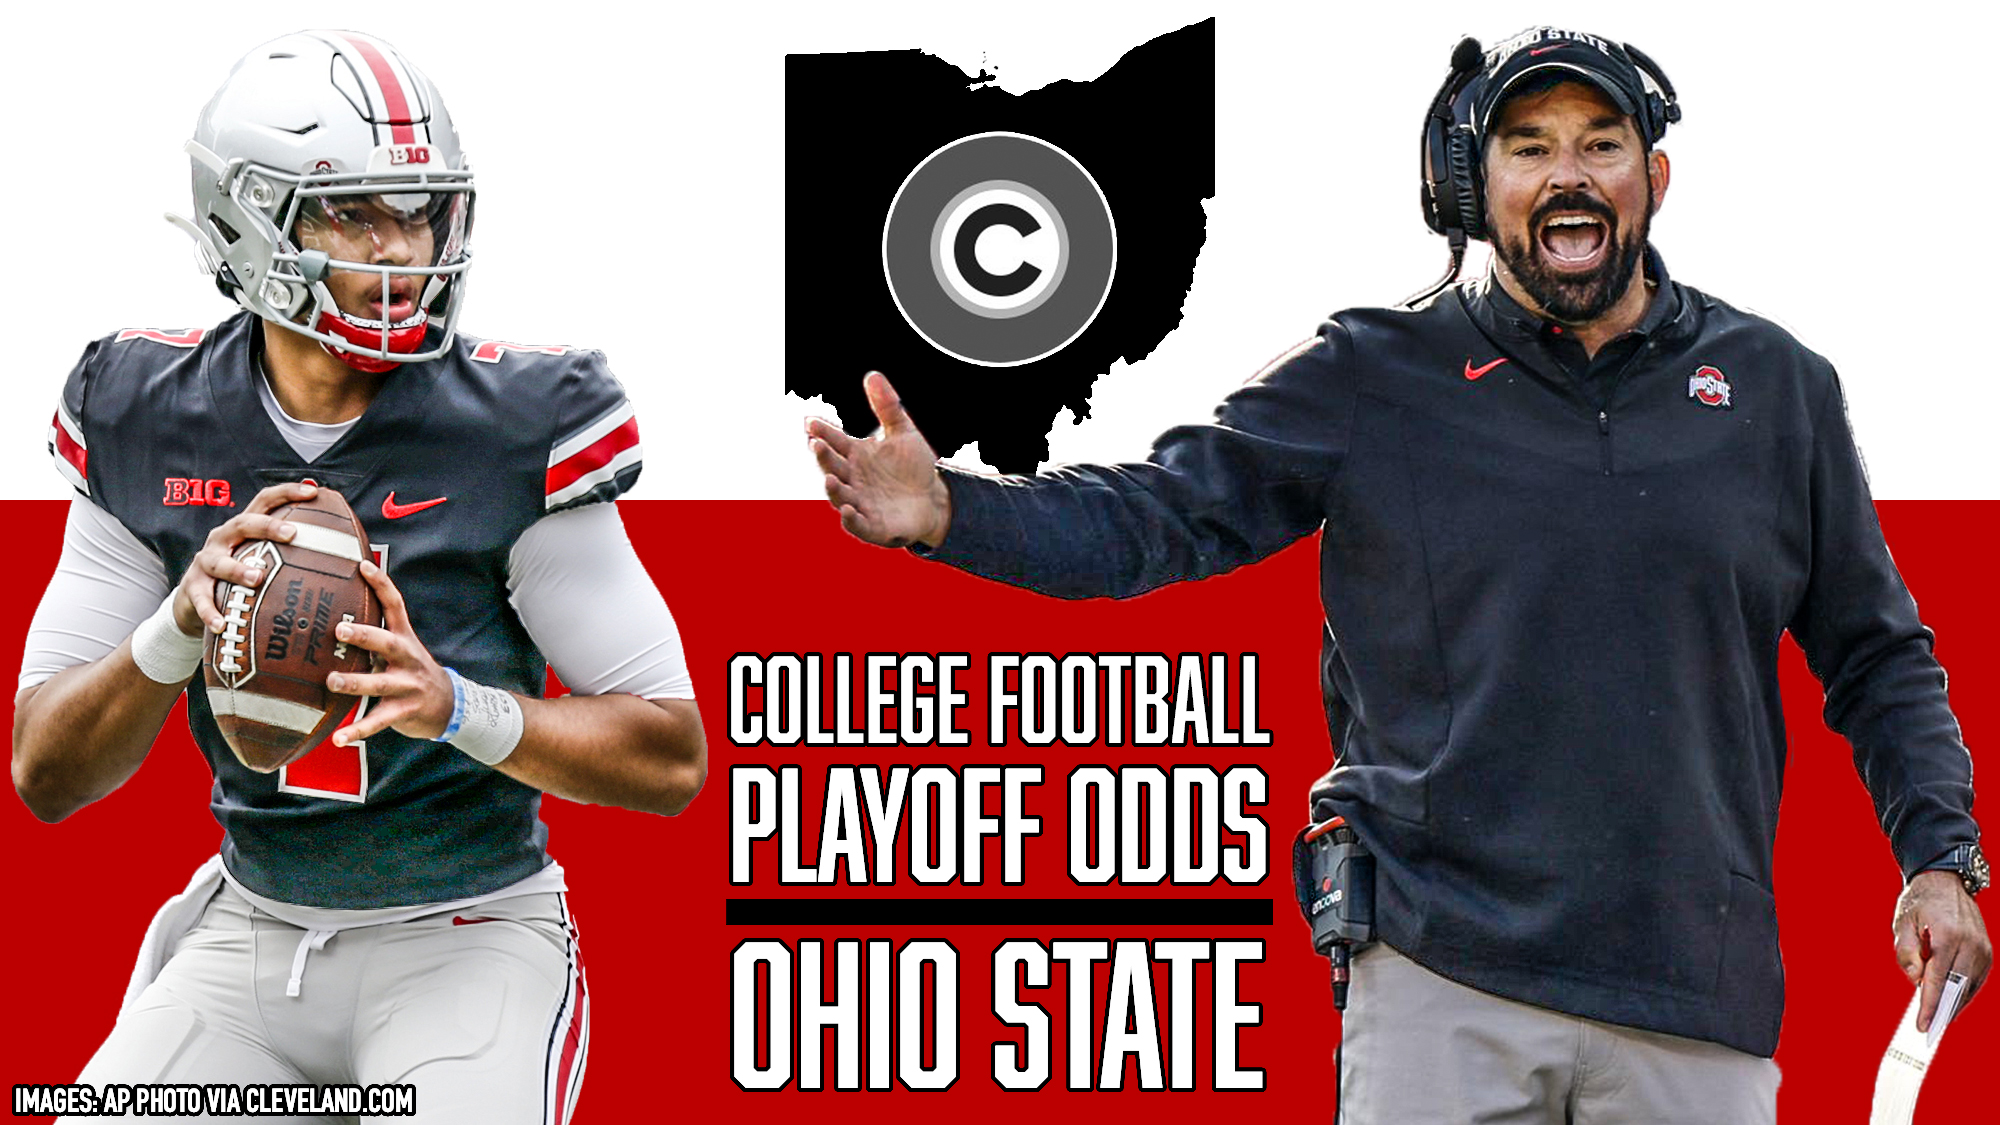 CFP National Championship teams: Who is playing in the College Football  Playoff title game January 10 - DraftKings Network